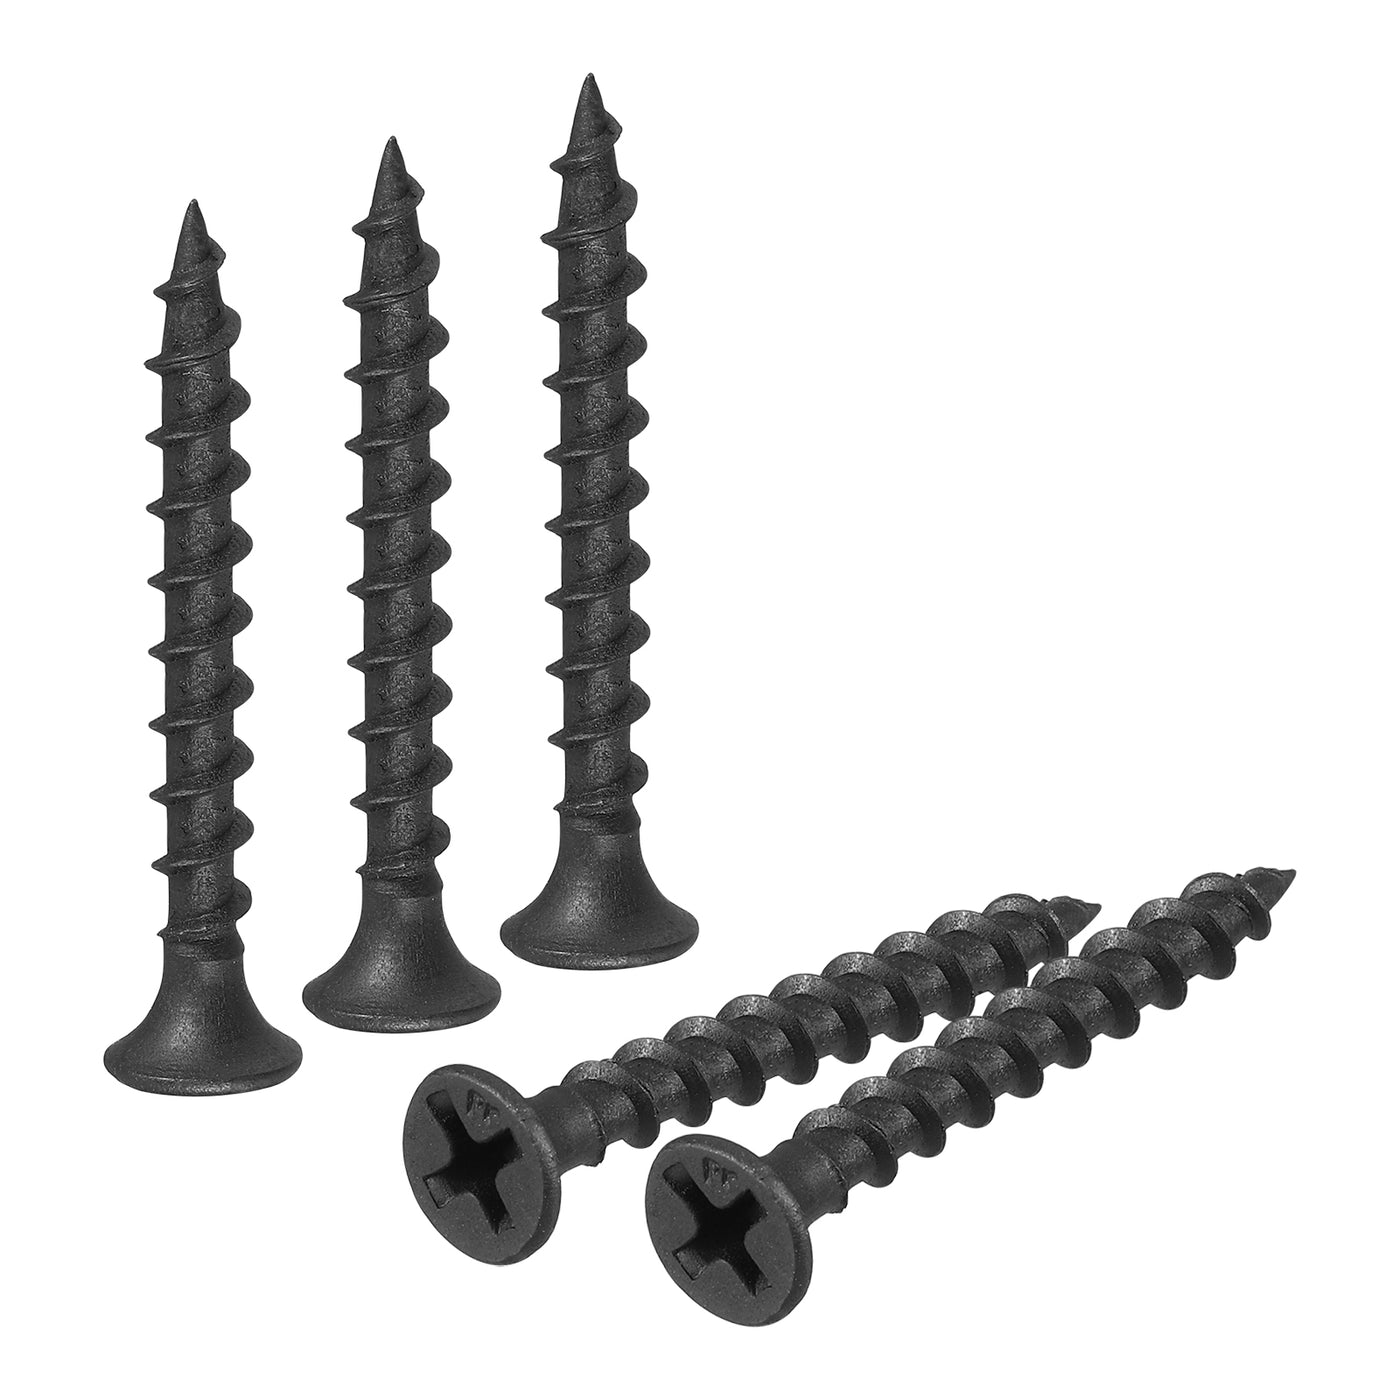 uxcell Uxcell M3.8x35mm 50pcs Phillips Drive Wood Screws, Carbon Steel Self Tapping Screws